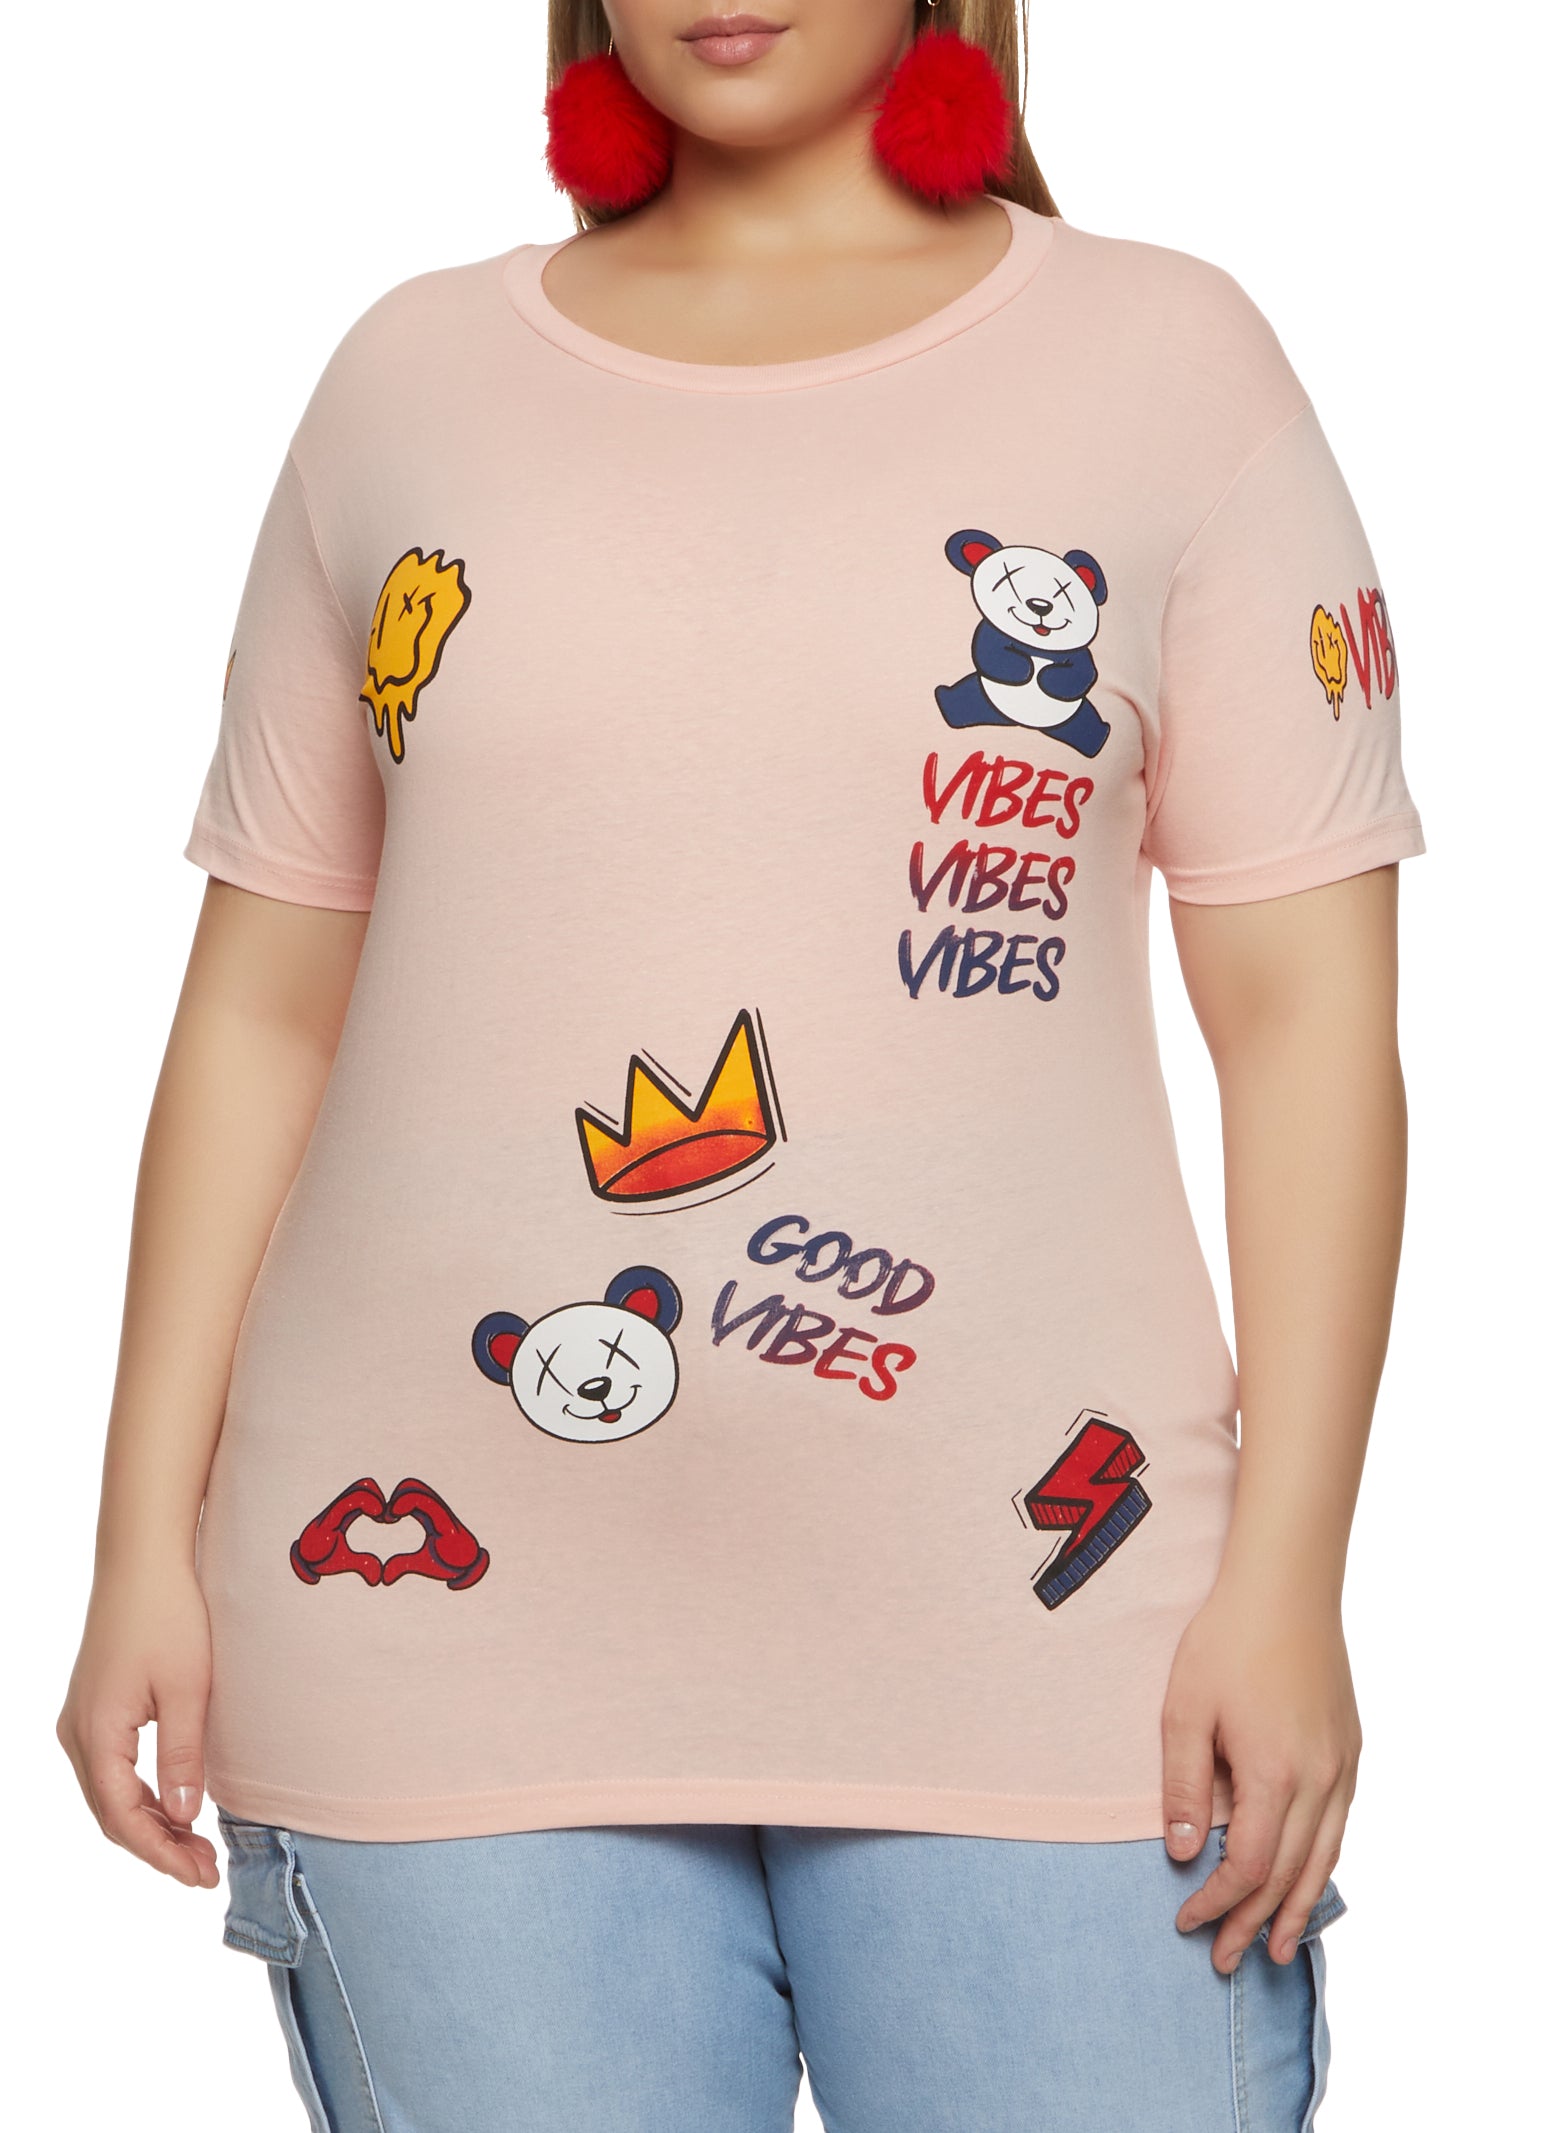 Lucky Brand Women's Graphic T-Shirt. Plus Sizes Available.